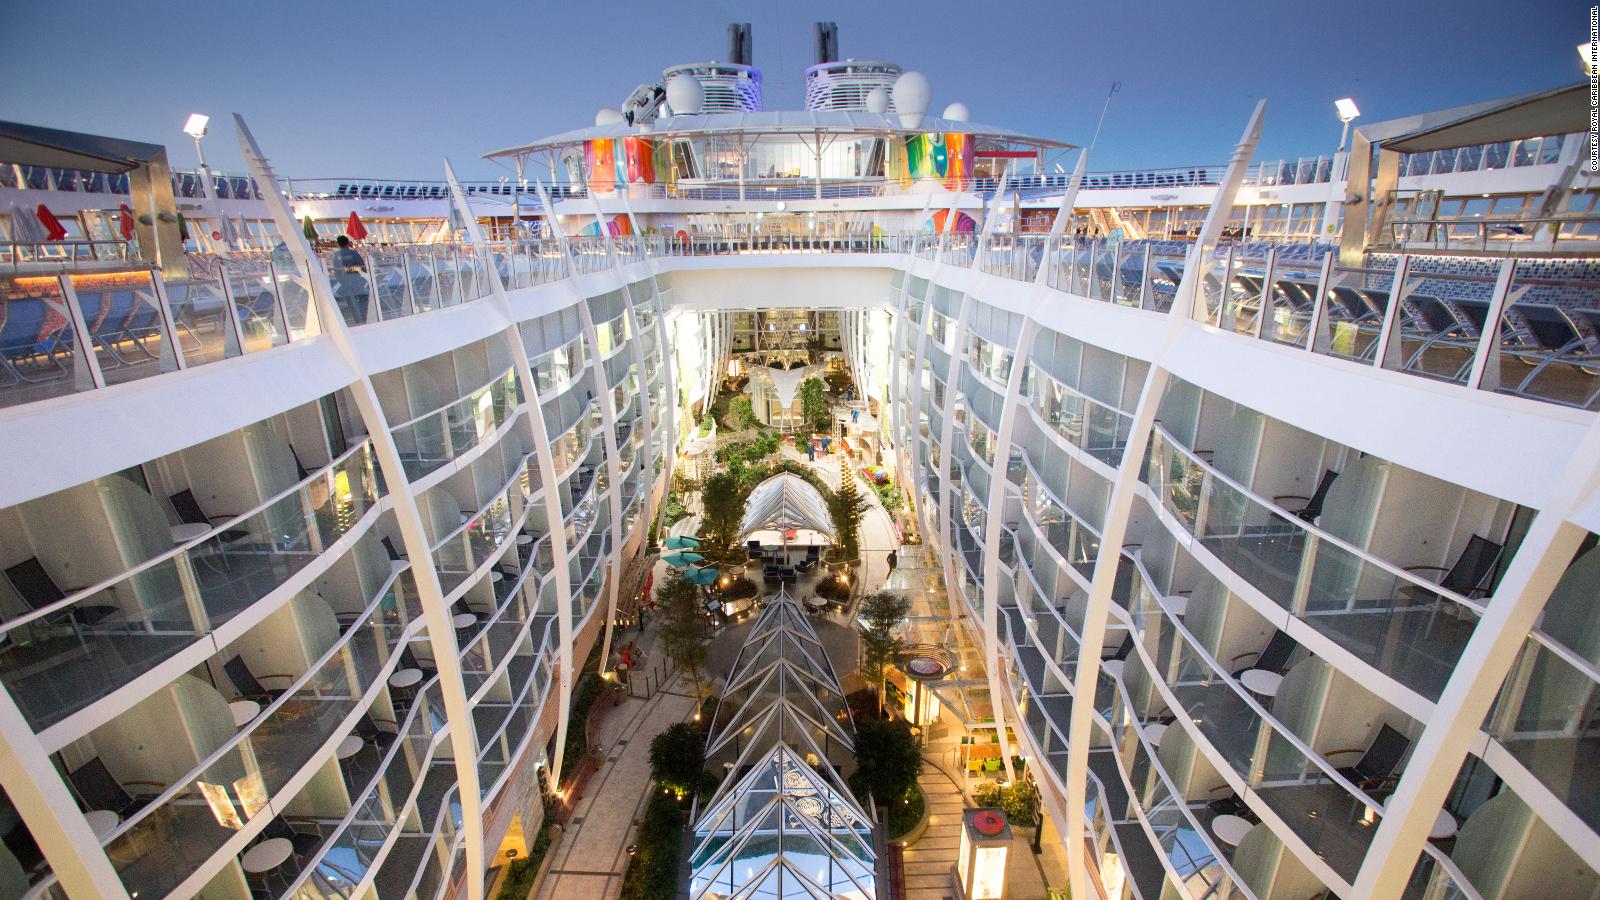 15 largest cruise ships in the world